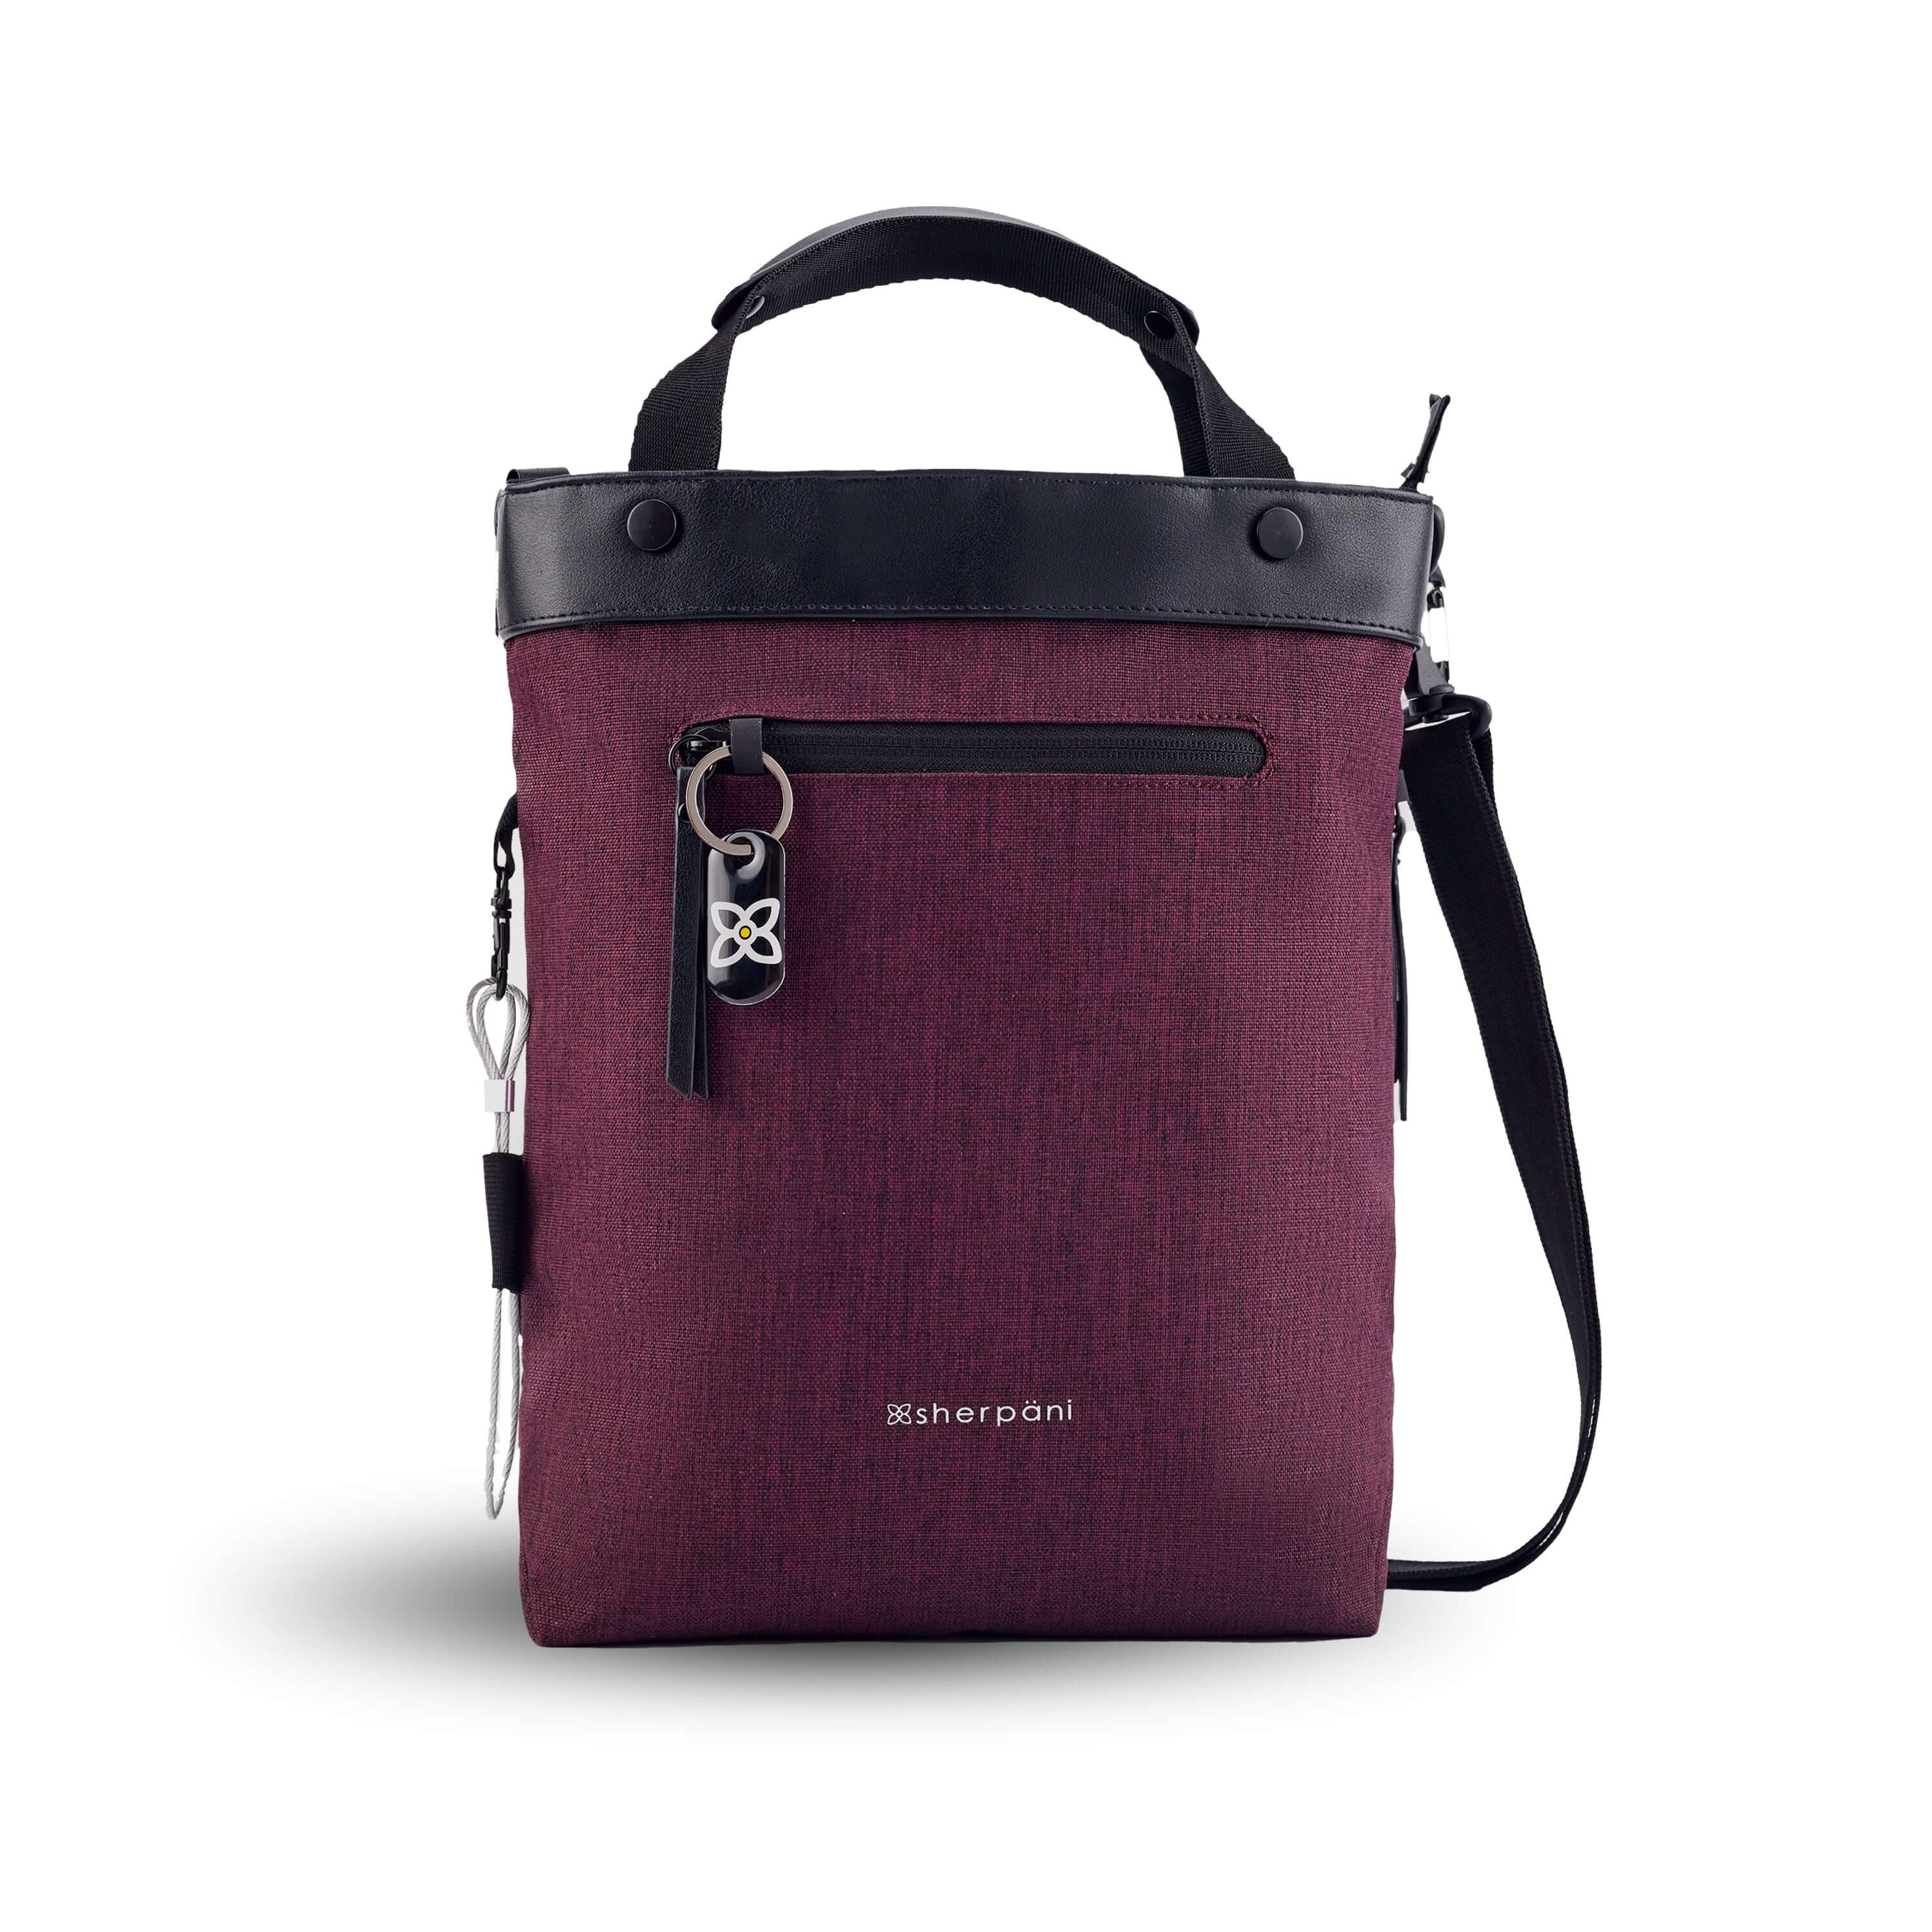 Flat front view of Sherpani&#39;s Anti-Theft bag, the Geo AT in Merlot, with vegan leather accents in black. The bag features short tote handles and an adjustable/detachable crossbody strap. There is a locking zipper compartment on the front with a ReturnMe tag. A chair loop lock is clipped to the side and secured in place by an elastic tab.